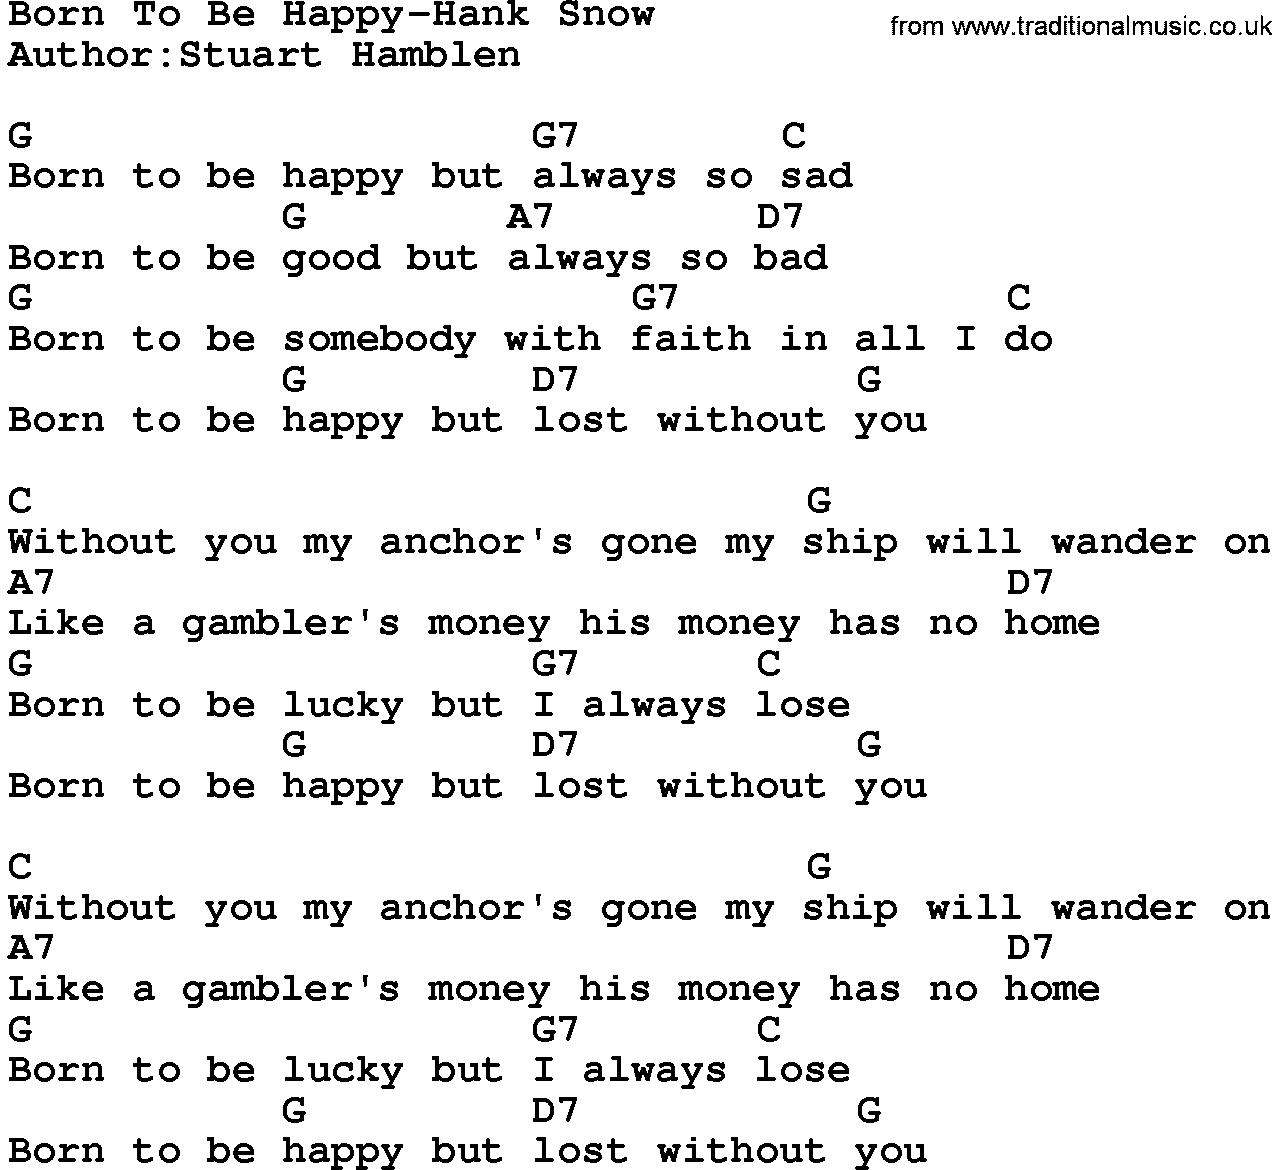 Country music song: Born To Be Happy-Hank Snow lyrics and chords